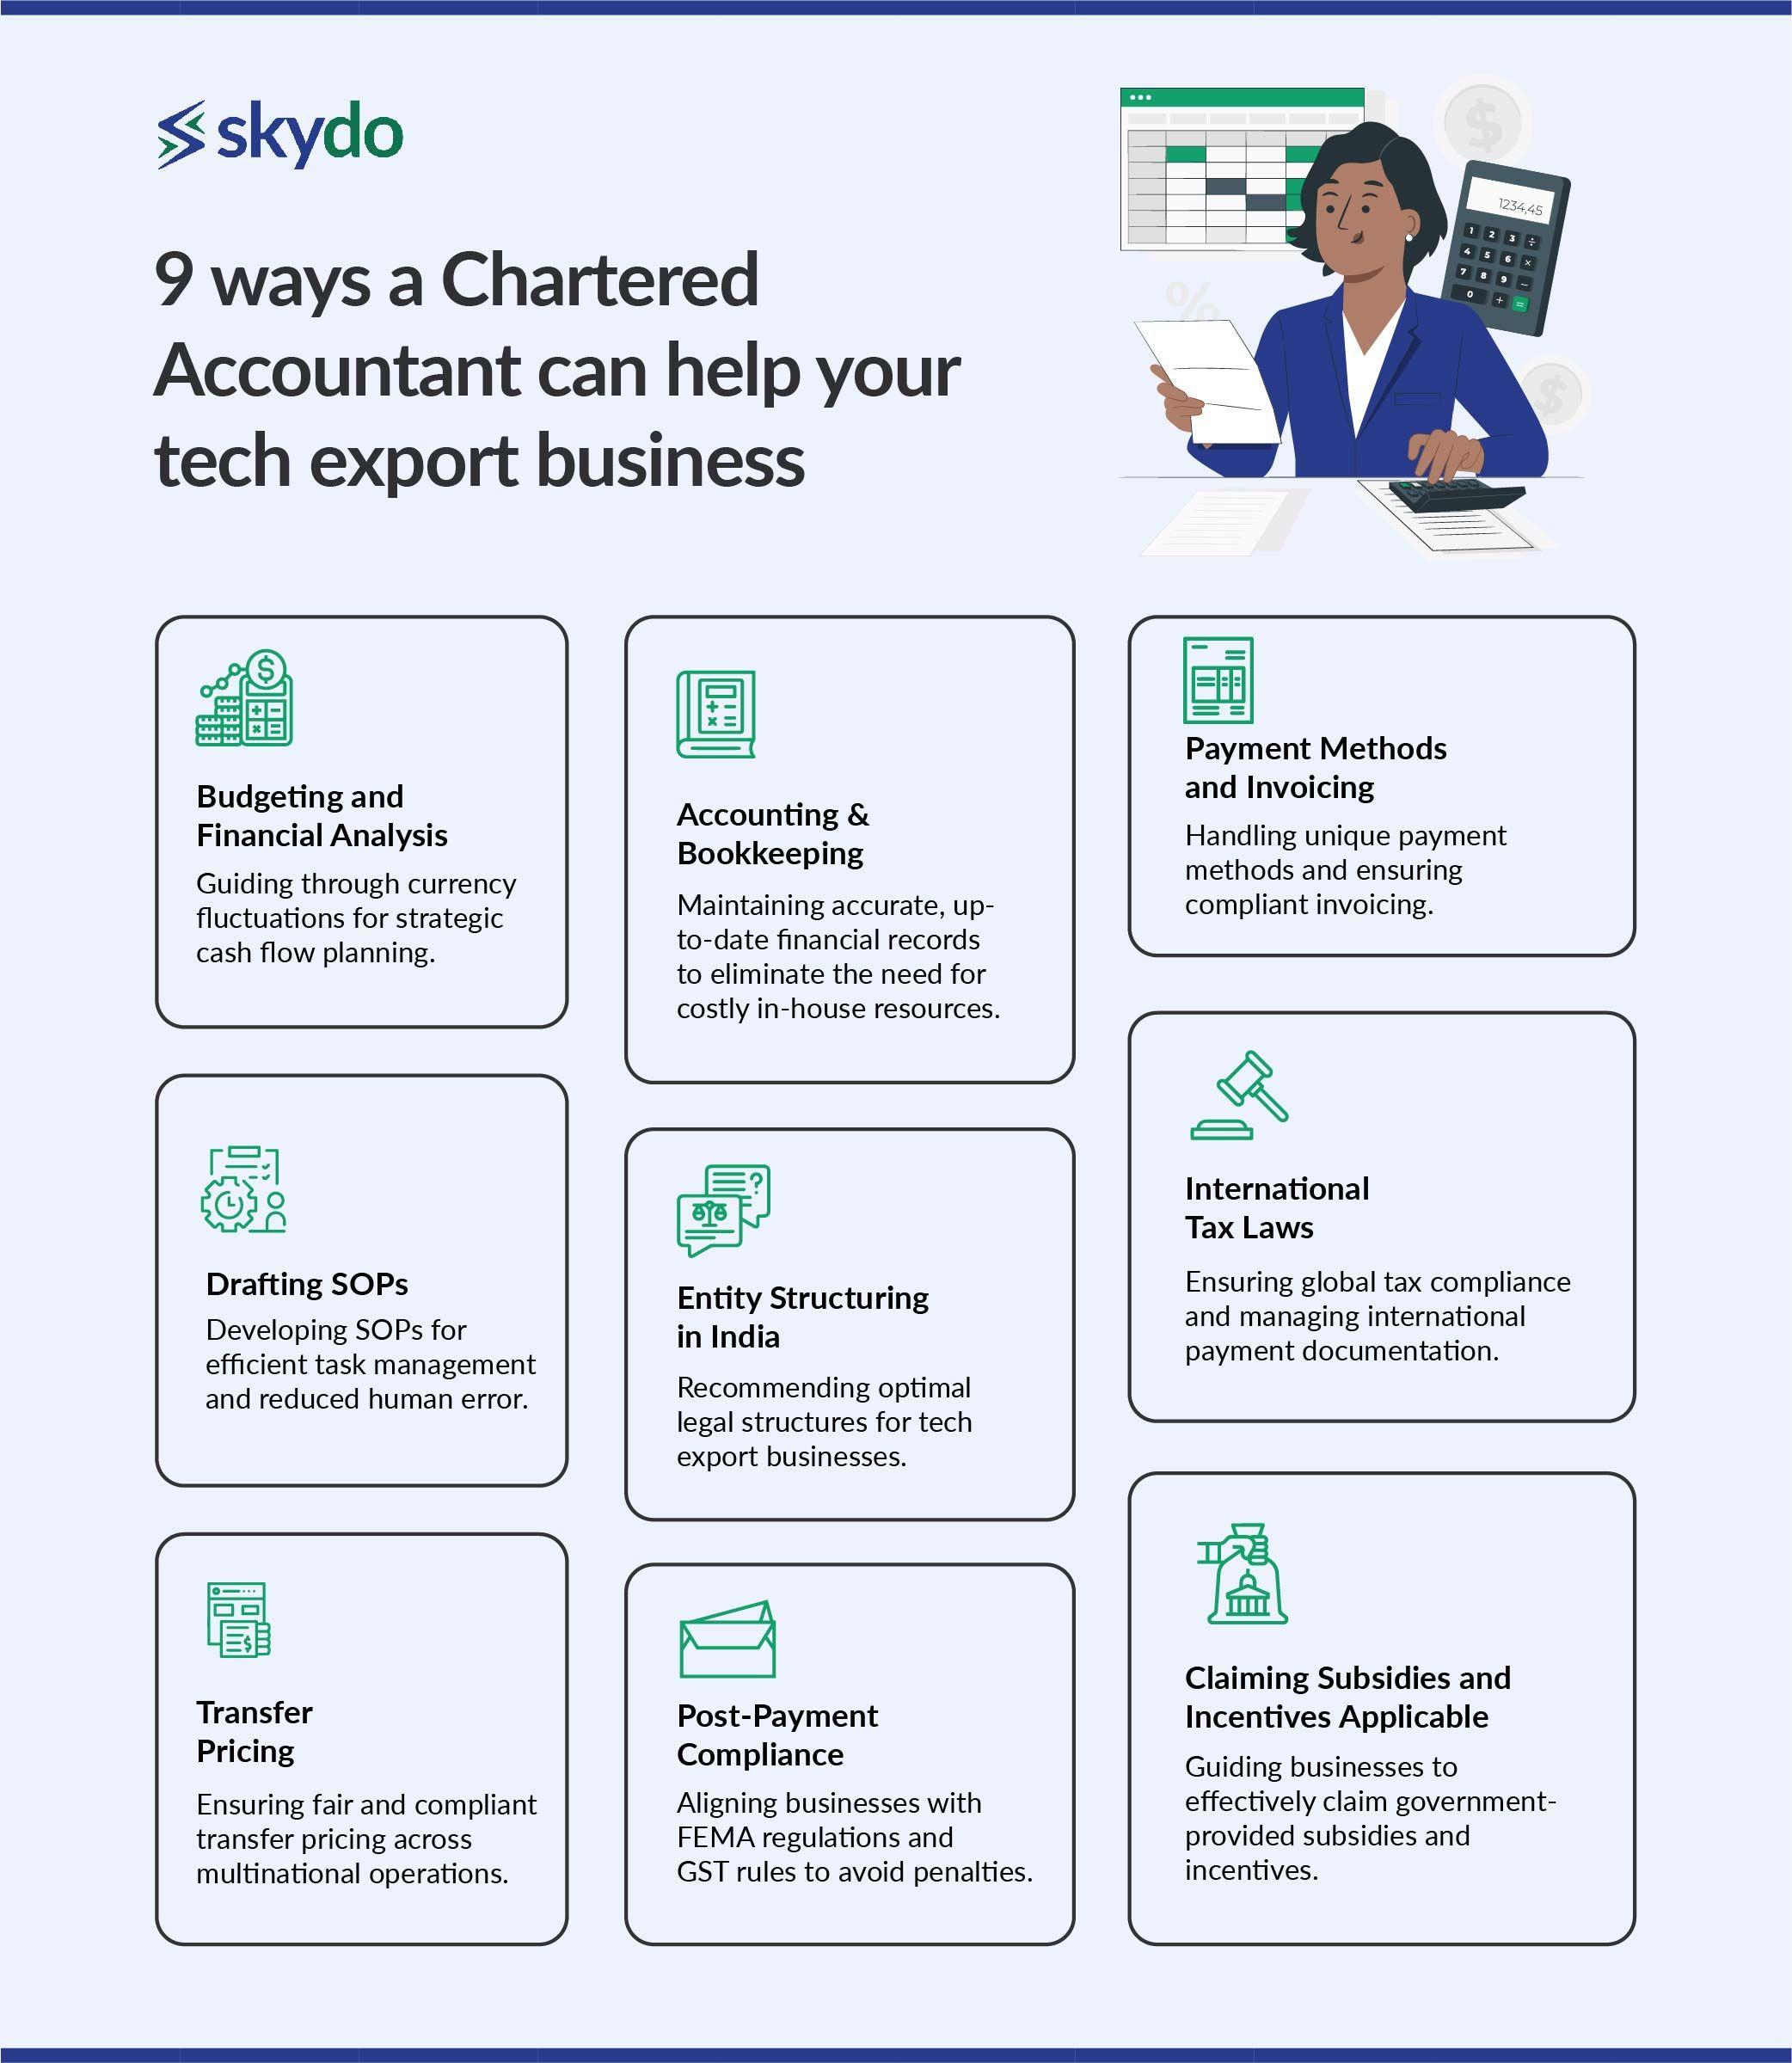 9 Ways a Chartered Accountant Can Help Your Tech Export Business